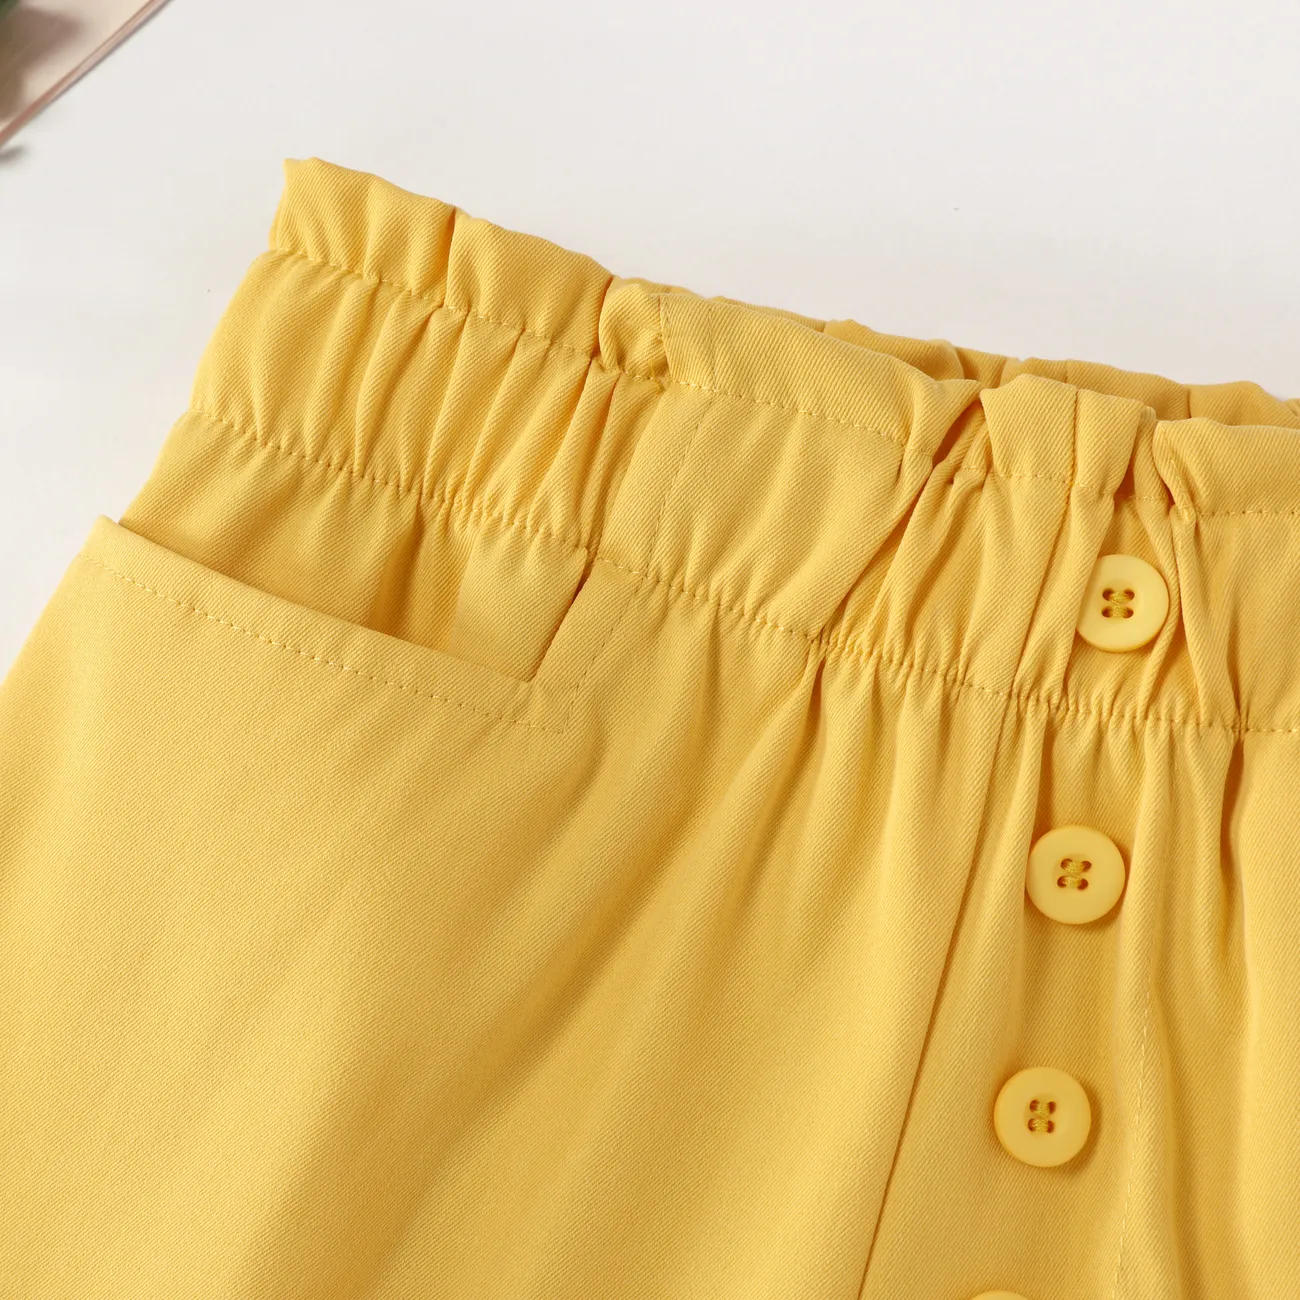 Cute High-Waisted Lace Shorts for Girls, Polyester Fabric, 1pc Set, Casual Style, Solid Color Yellow big image 1